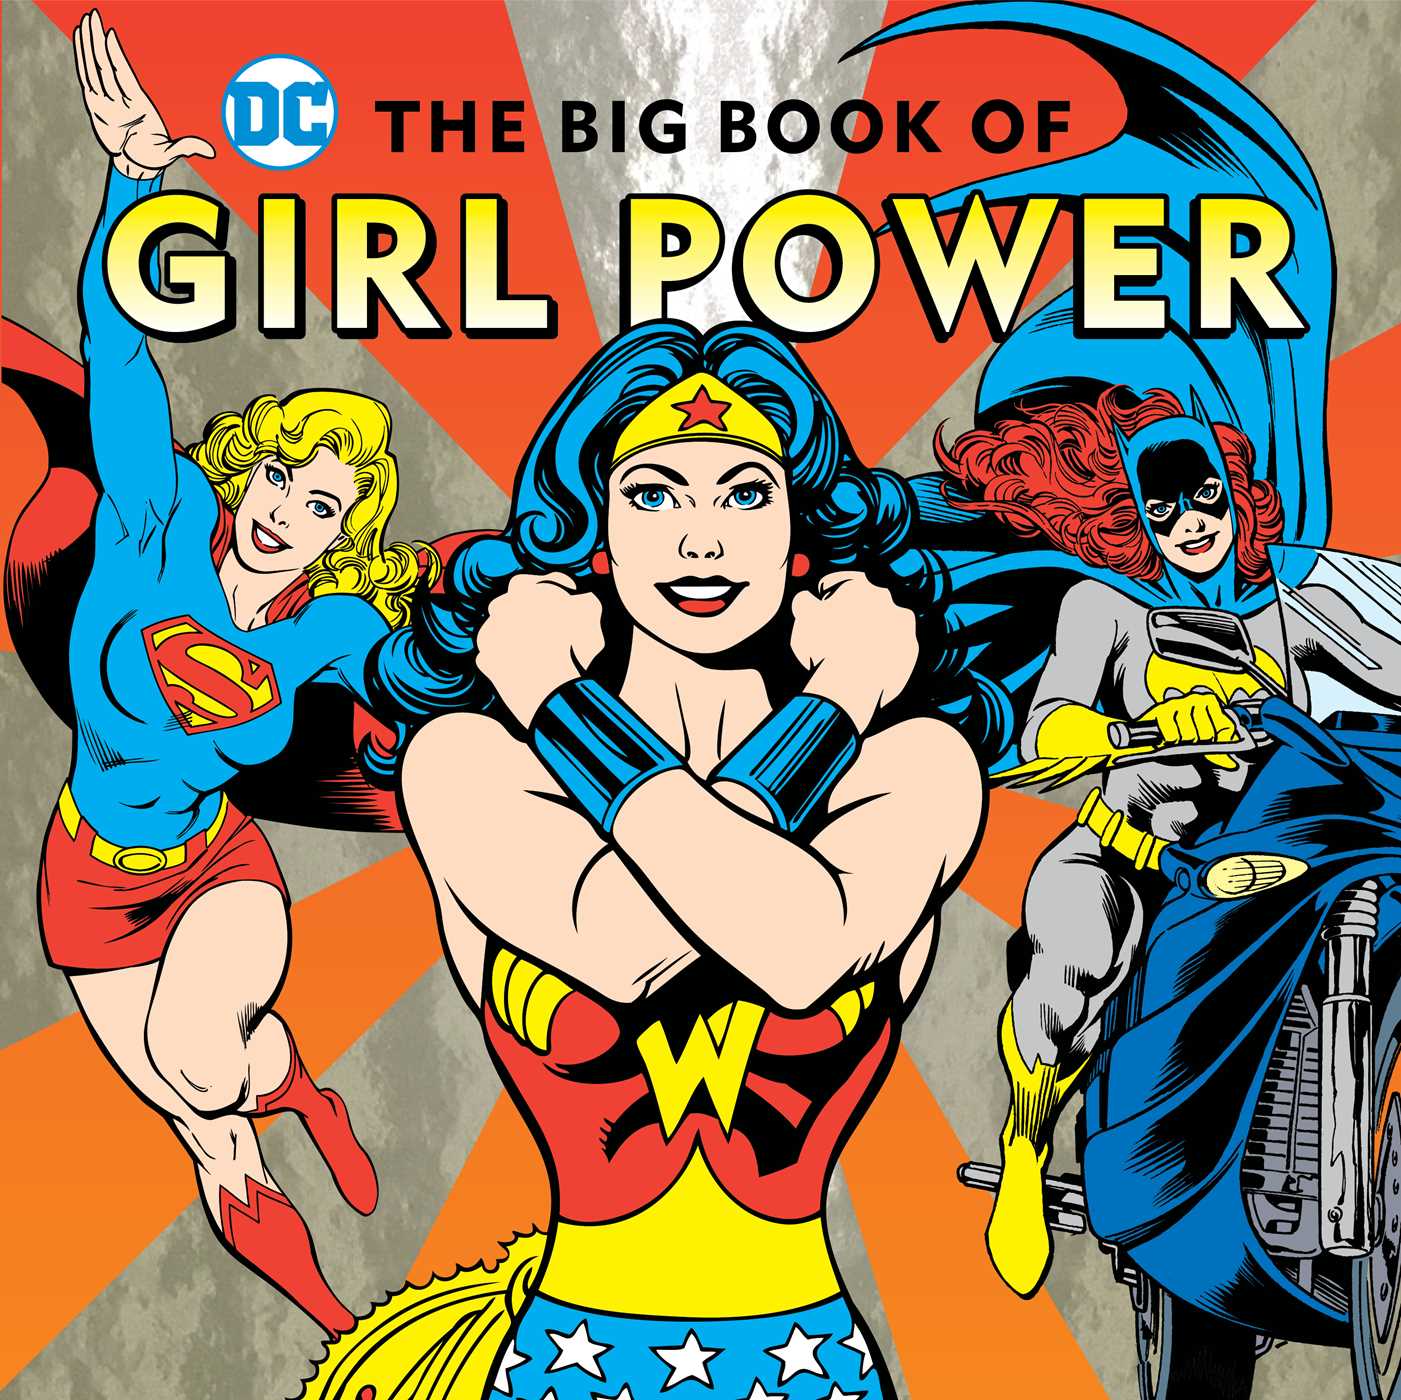 The Big Book of Girl Power | Book by Julie Merberg | Official ...